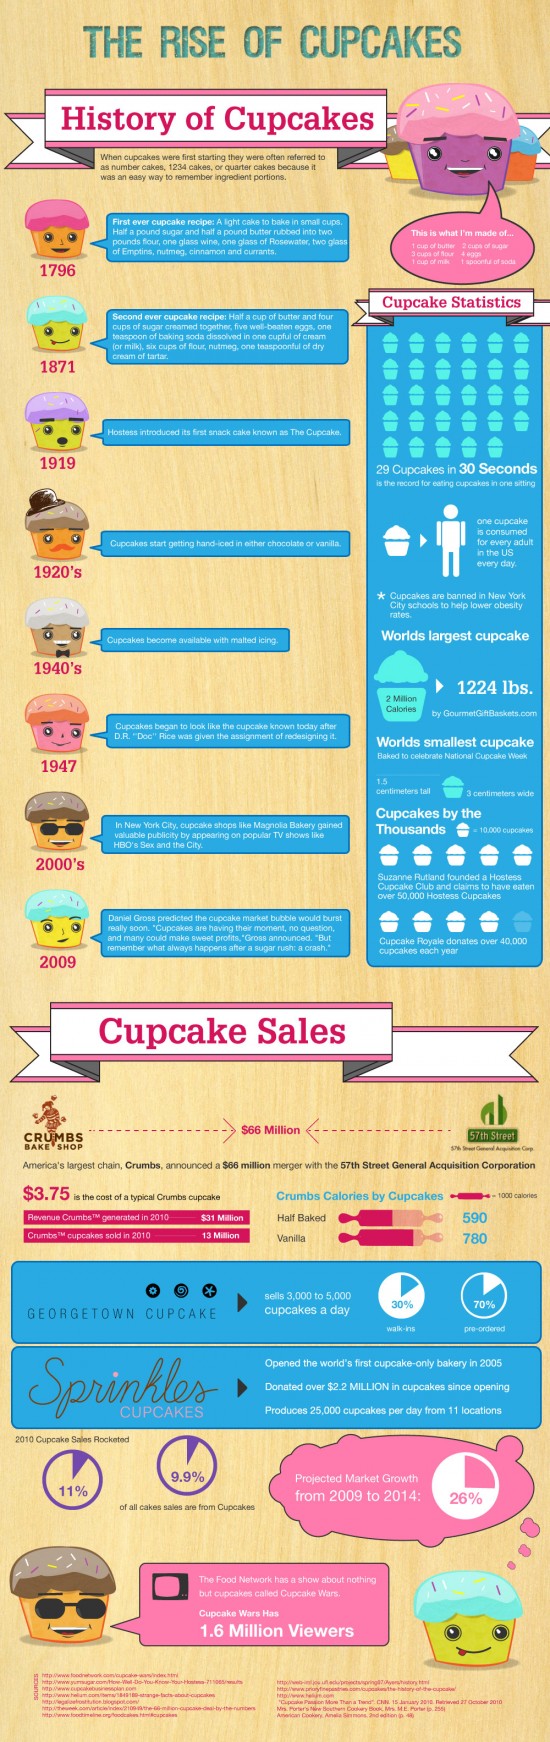 History of Cupcakes